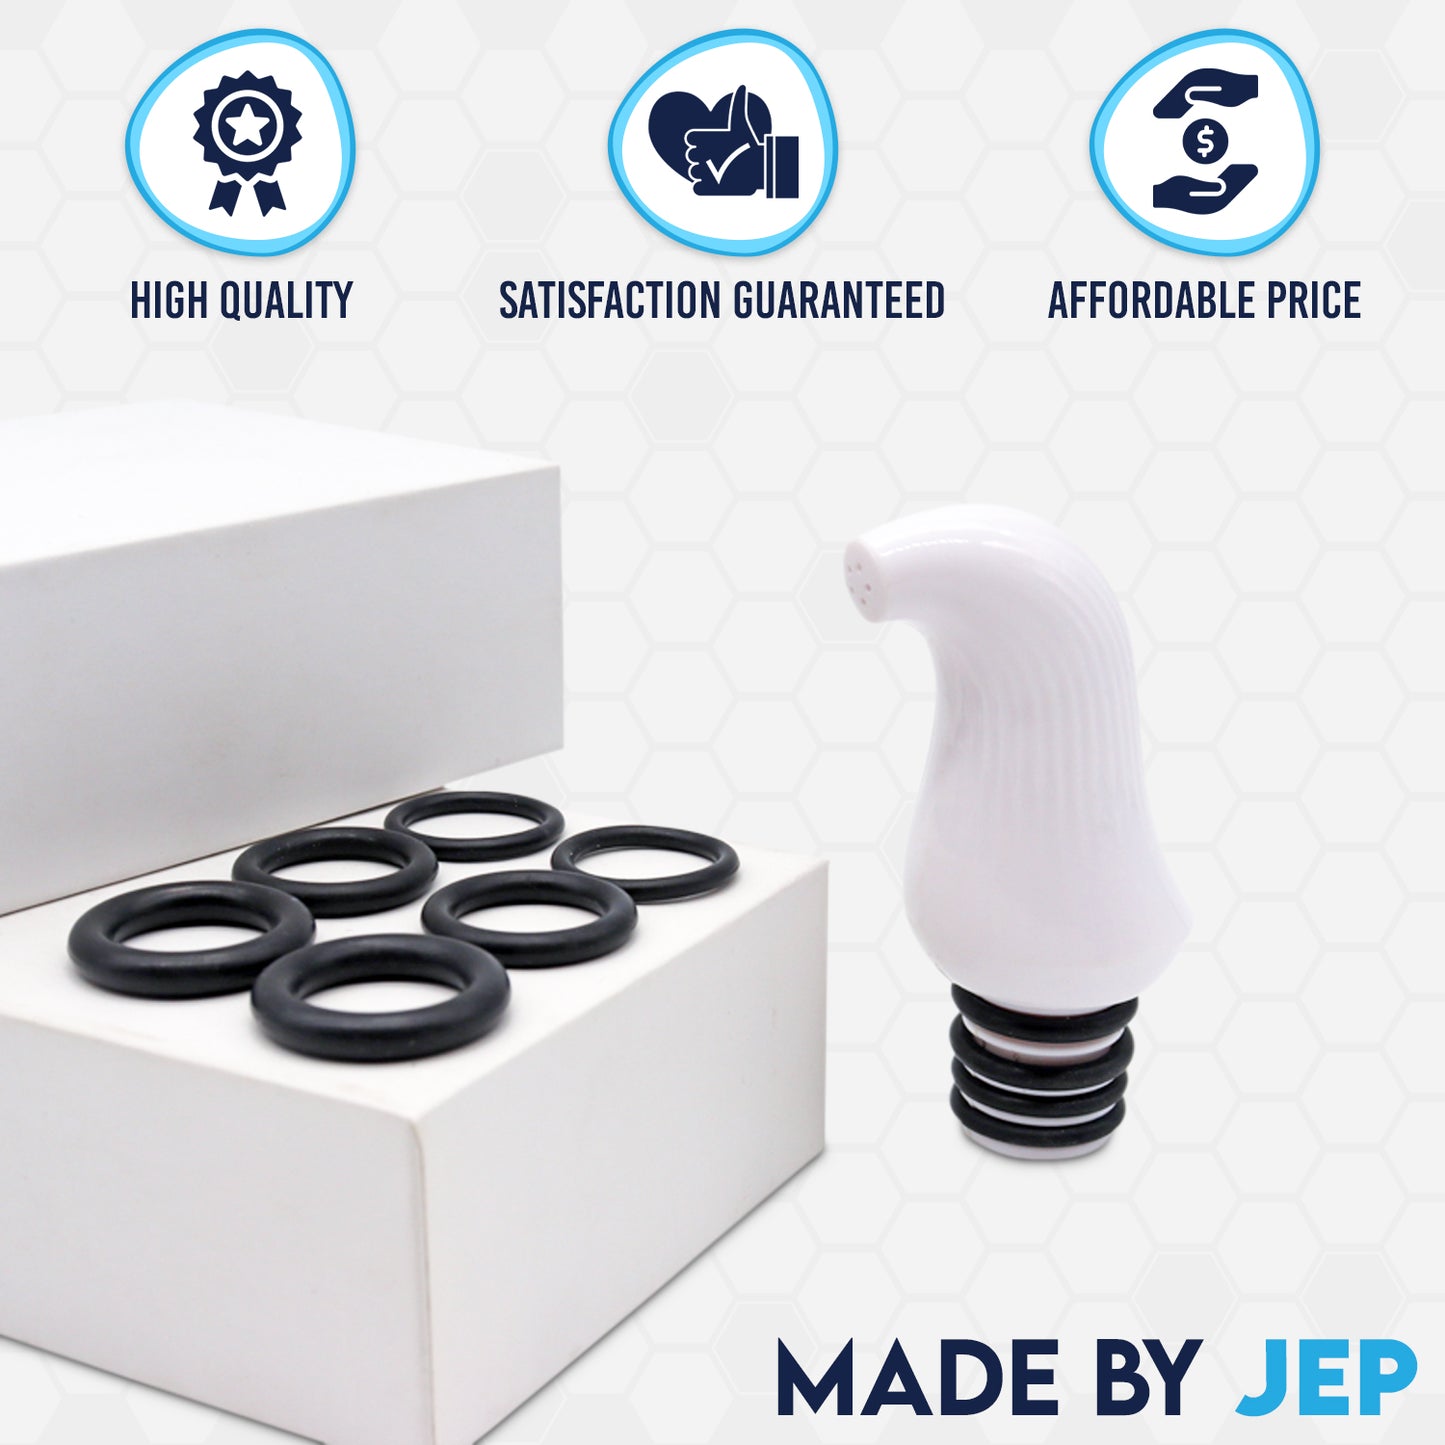 JEP 302 Travel Bidet Portable Bottle for Camping, Backpacking, Outdoors, & More